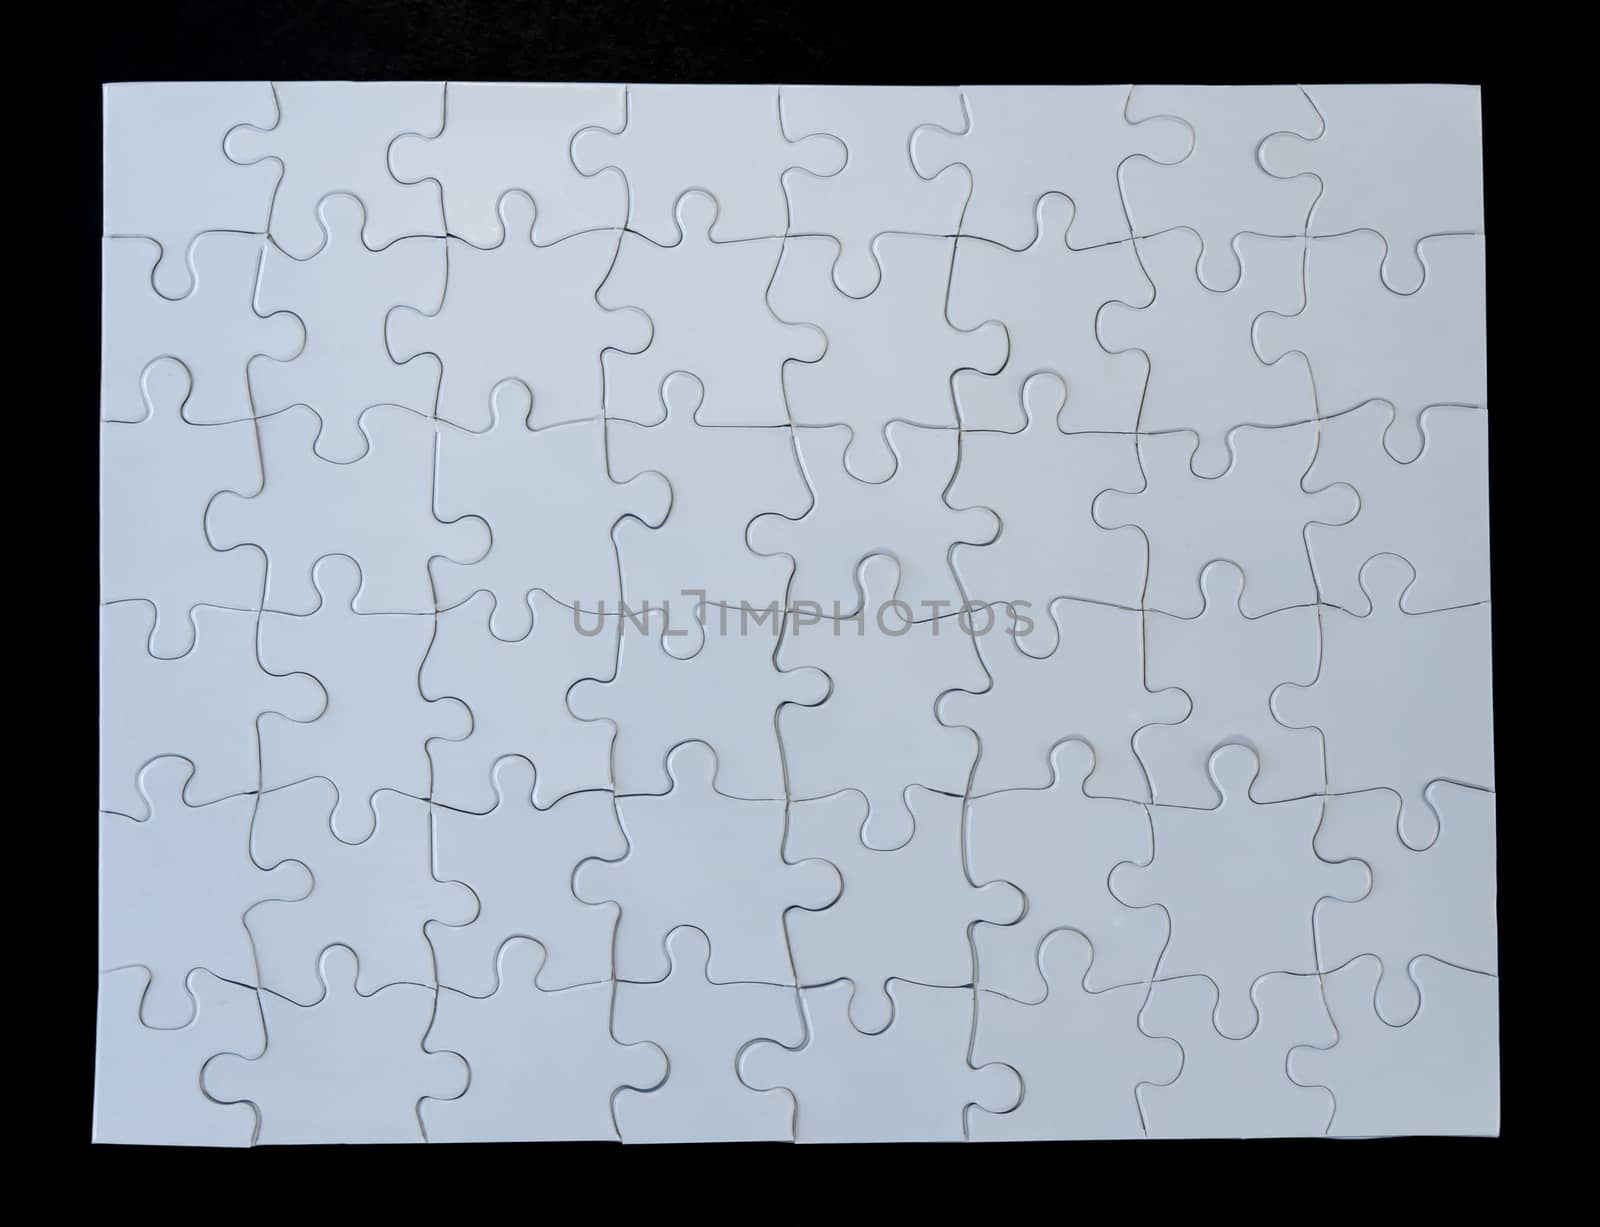 Completed white jigsaw puzzle on black background